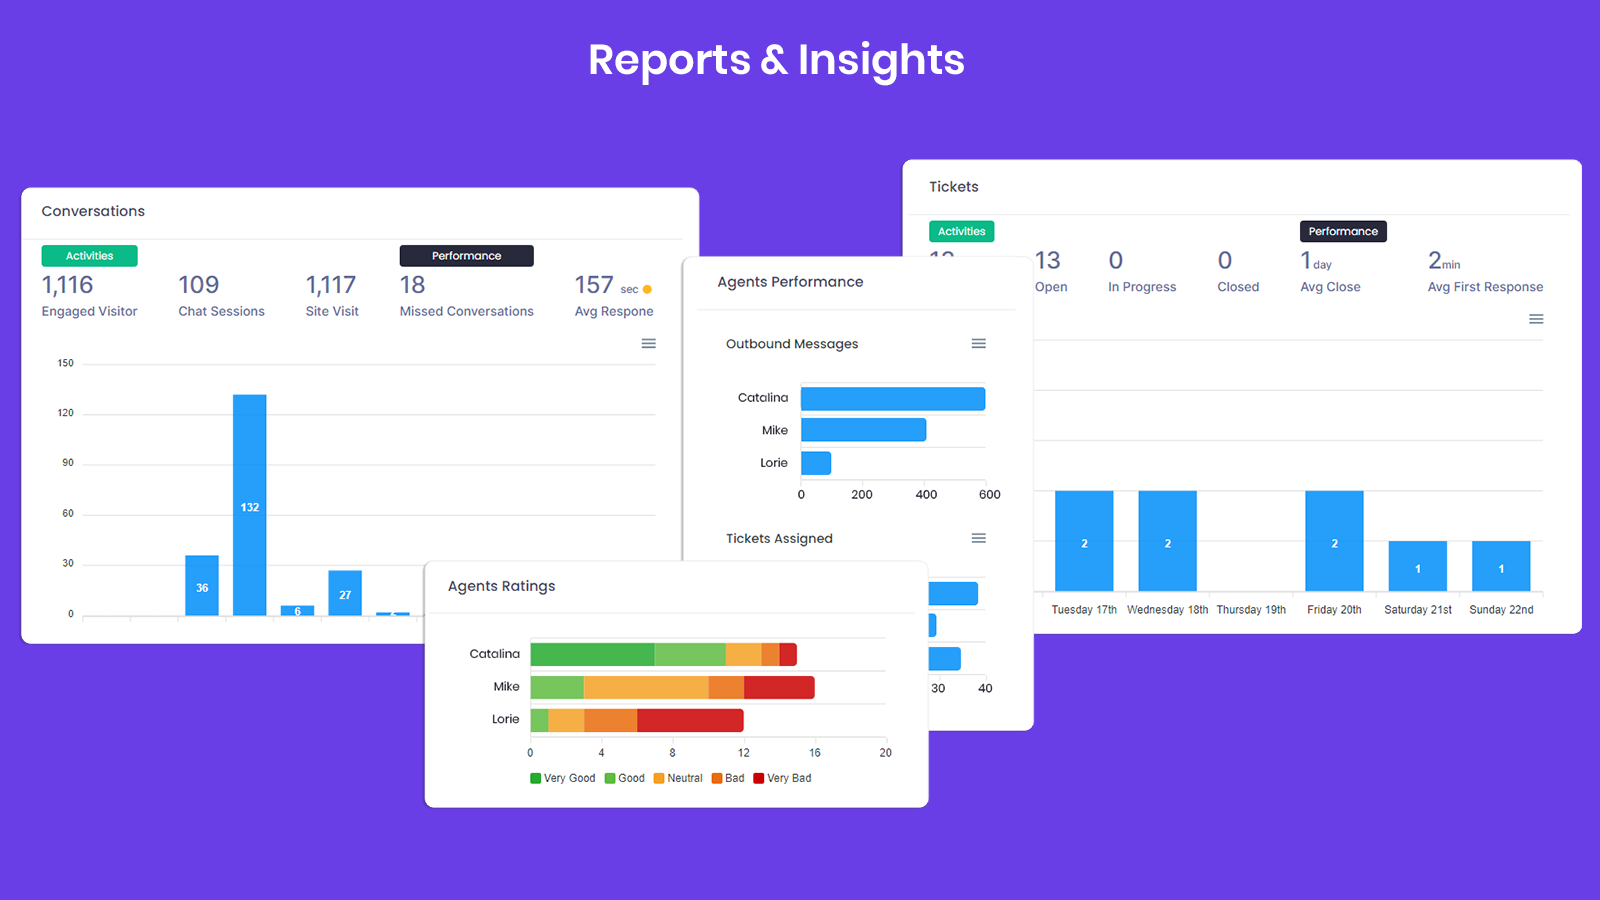 Reports & Insights